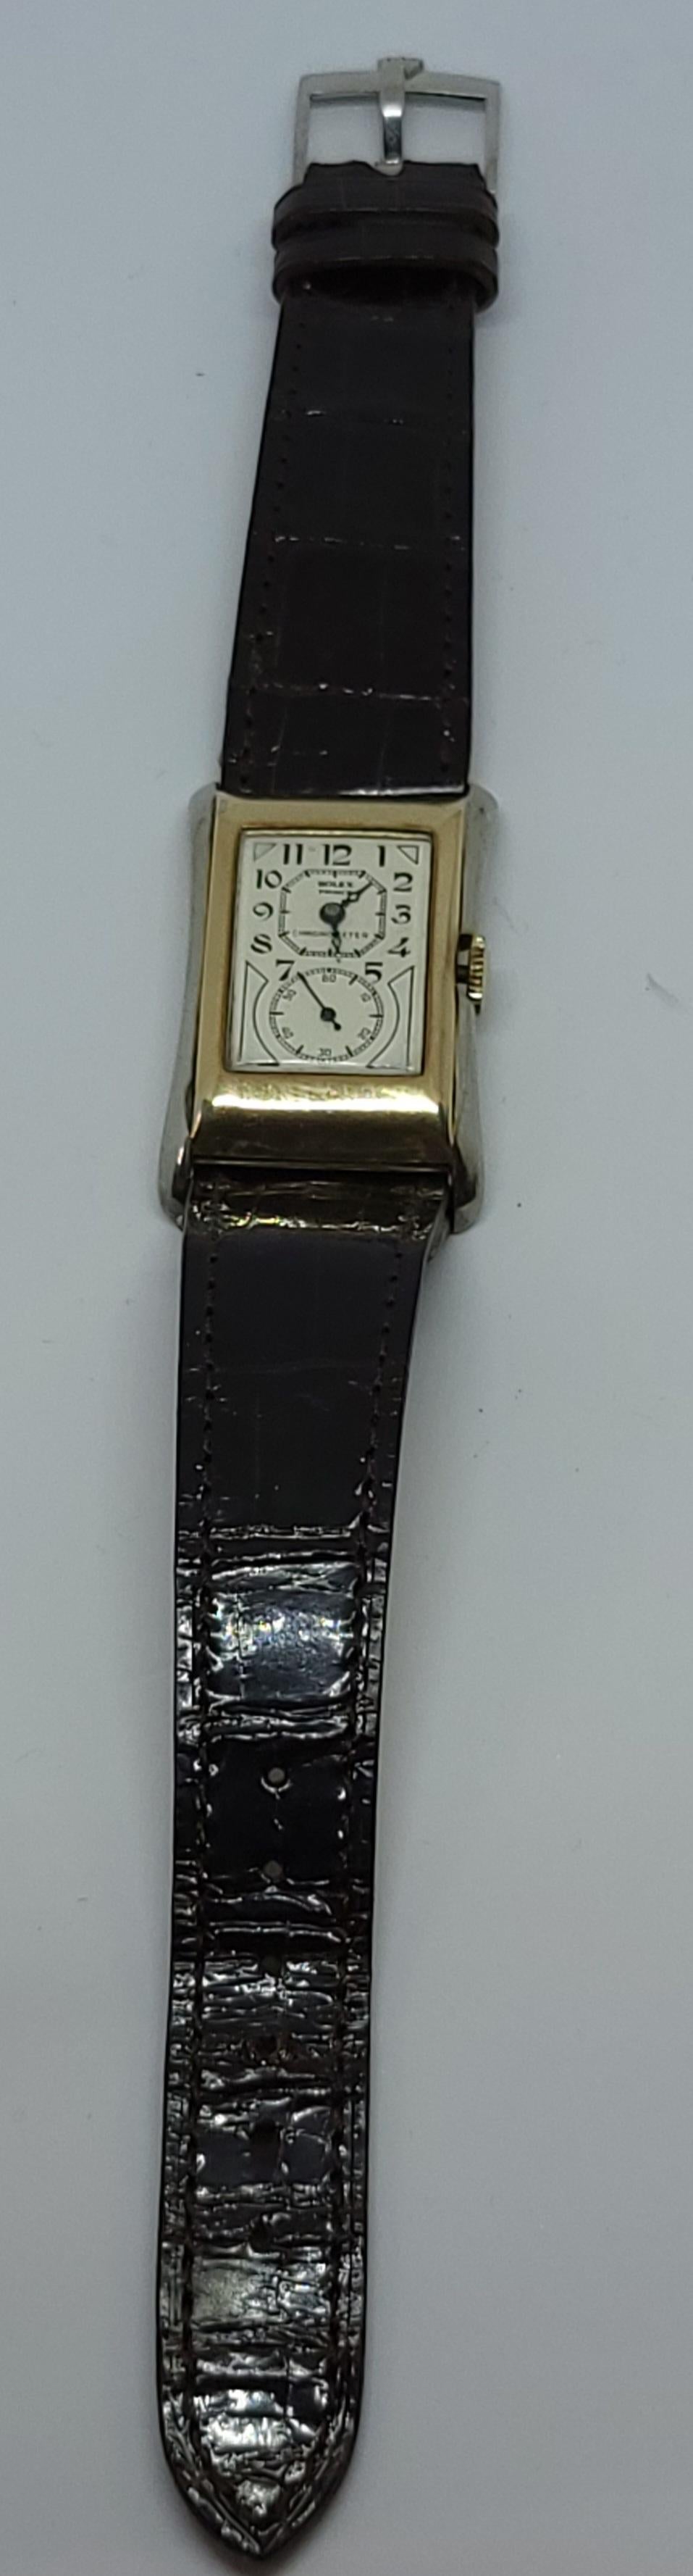 Rolex Prince Brancard Wrist Watch 9 Ct Gold For Sale 2